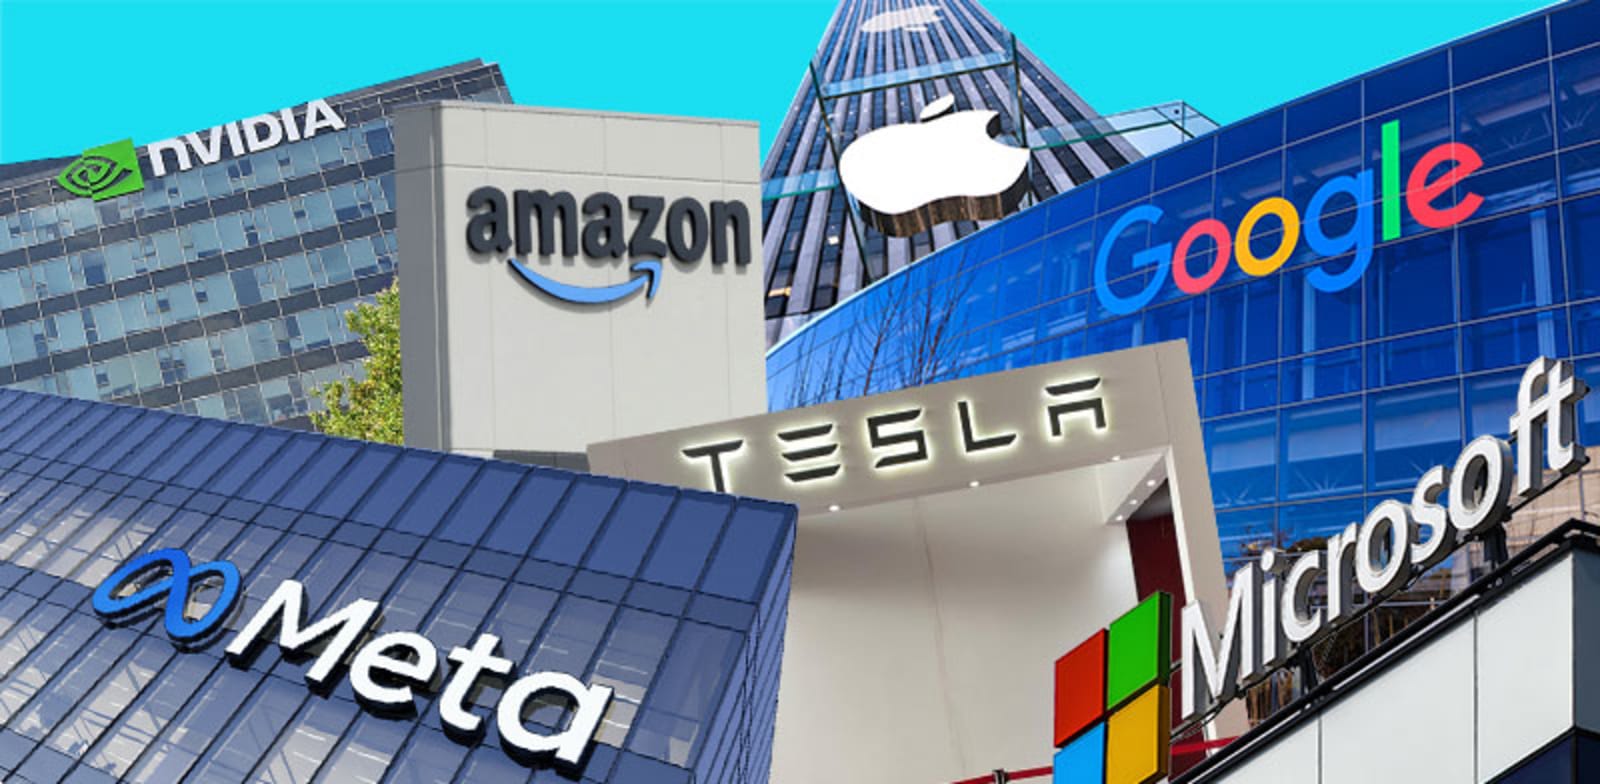 Which stocks did heavy investors purchase after selling Nvidia and Meta shares?